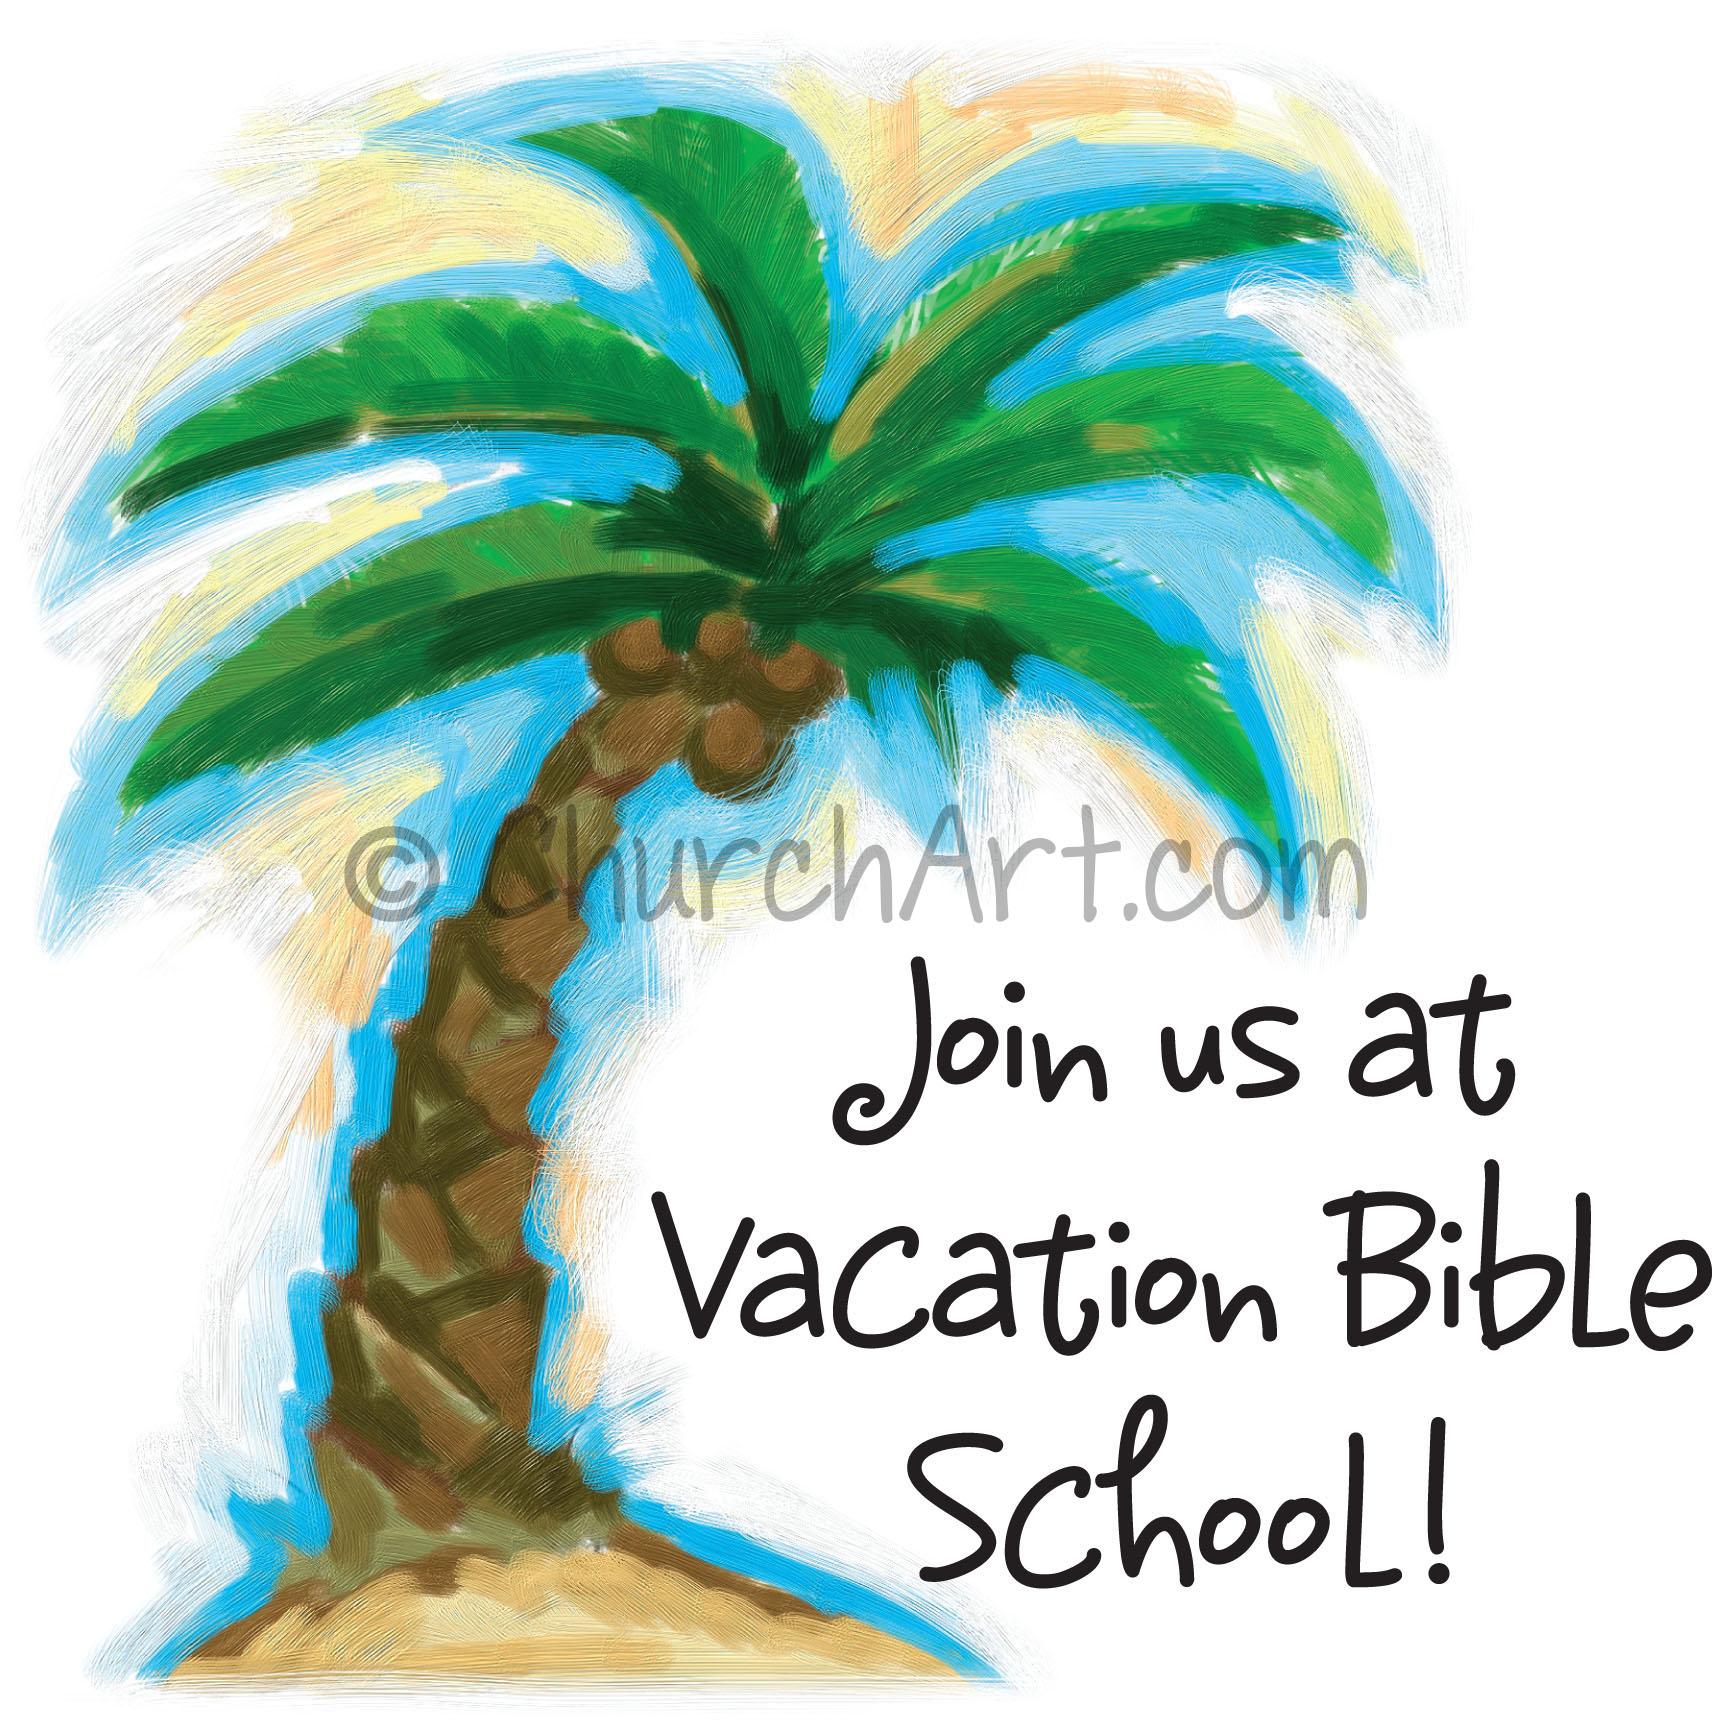 Join us at Vacation Bible school publicity art and imagery